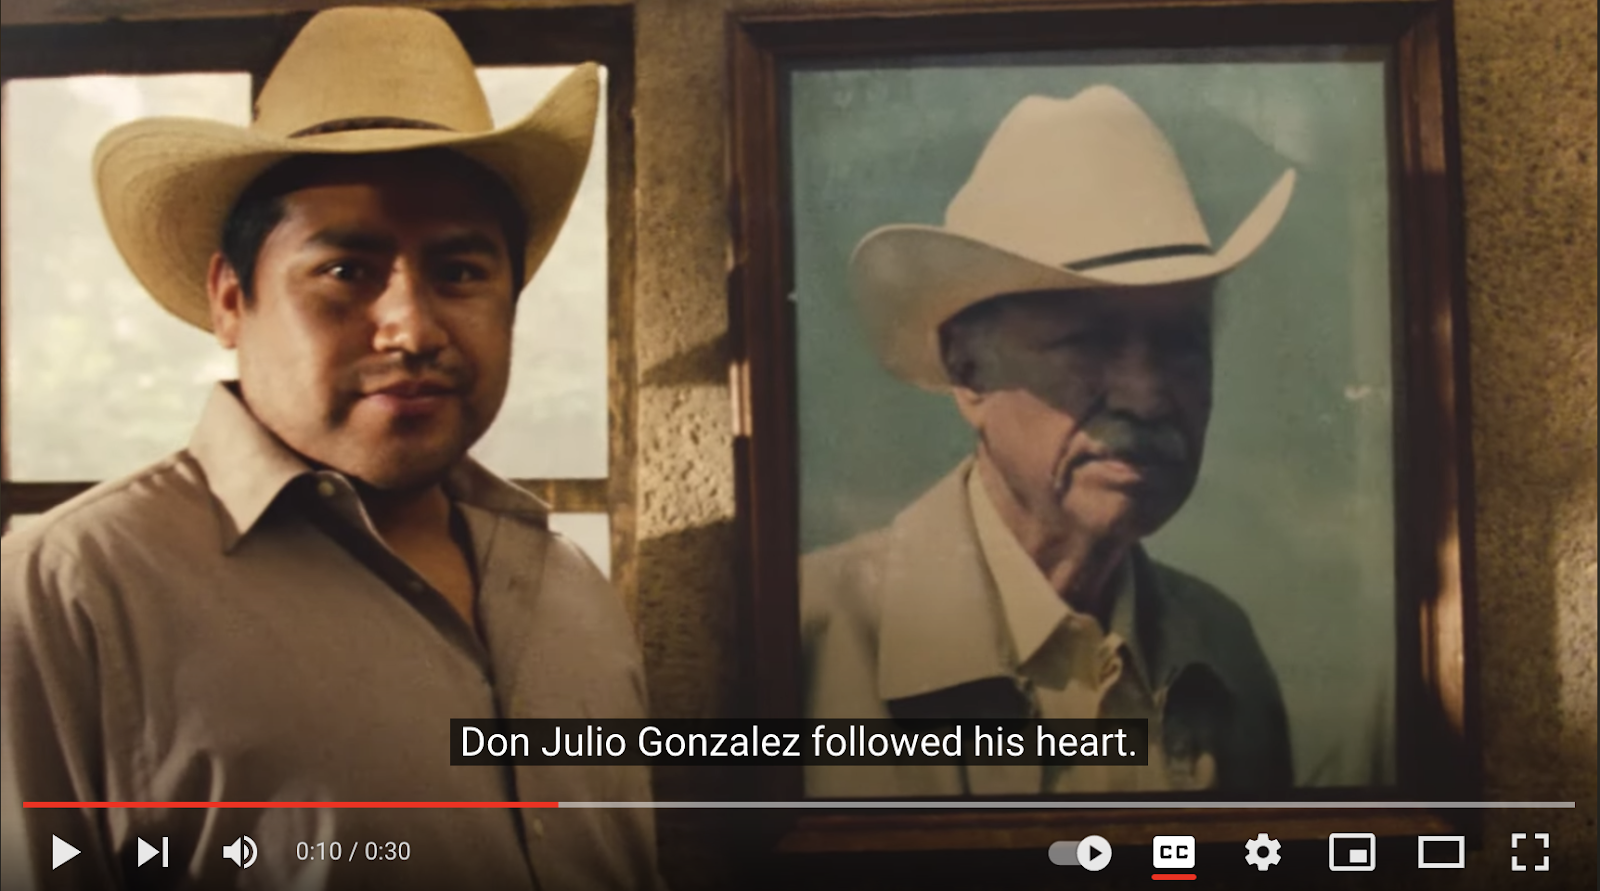 Screenshot of traditional marketing commercial repurposed as YouTube video. Man wearing a cowboy hat stands next to framed photo of Don Julio (namesake of brand) wearing a cowboy hat.